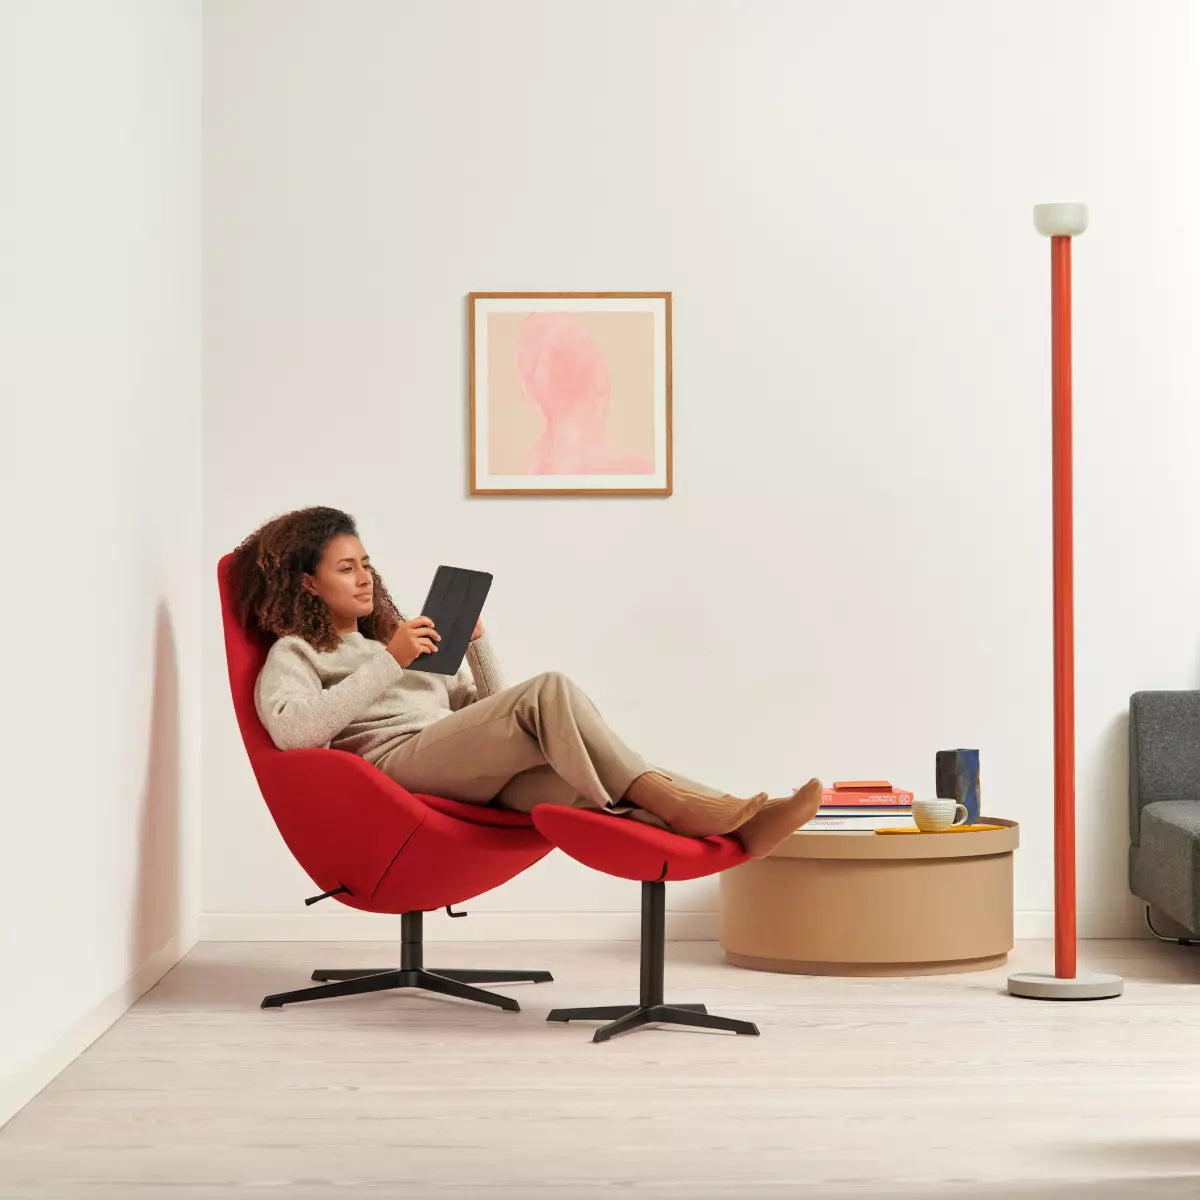 Kokon with Footrest Chair by Varier - Home Usage by a Lady surfing on her iPad